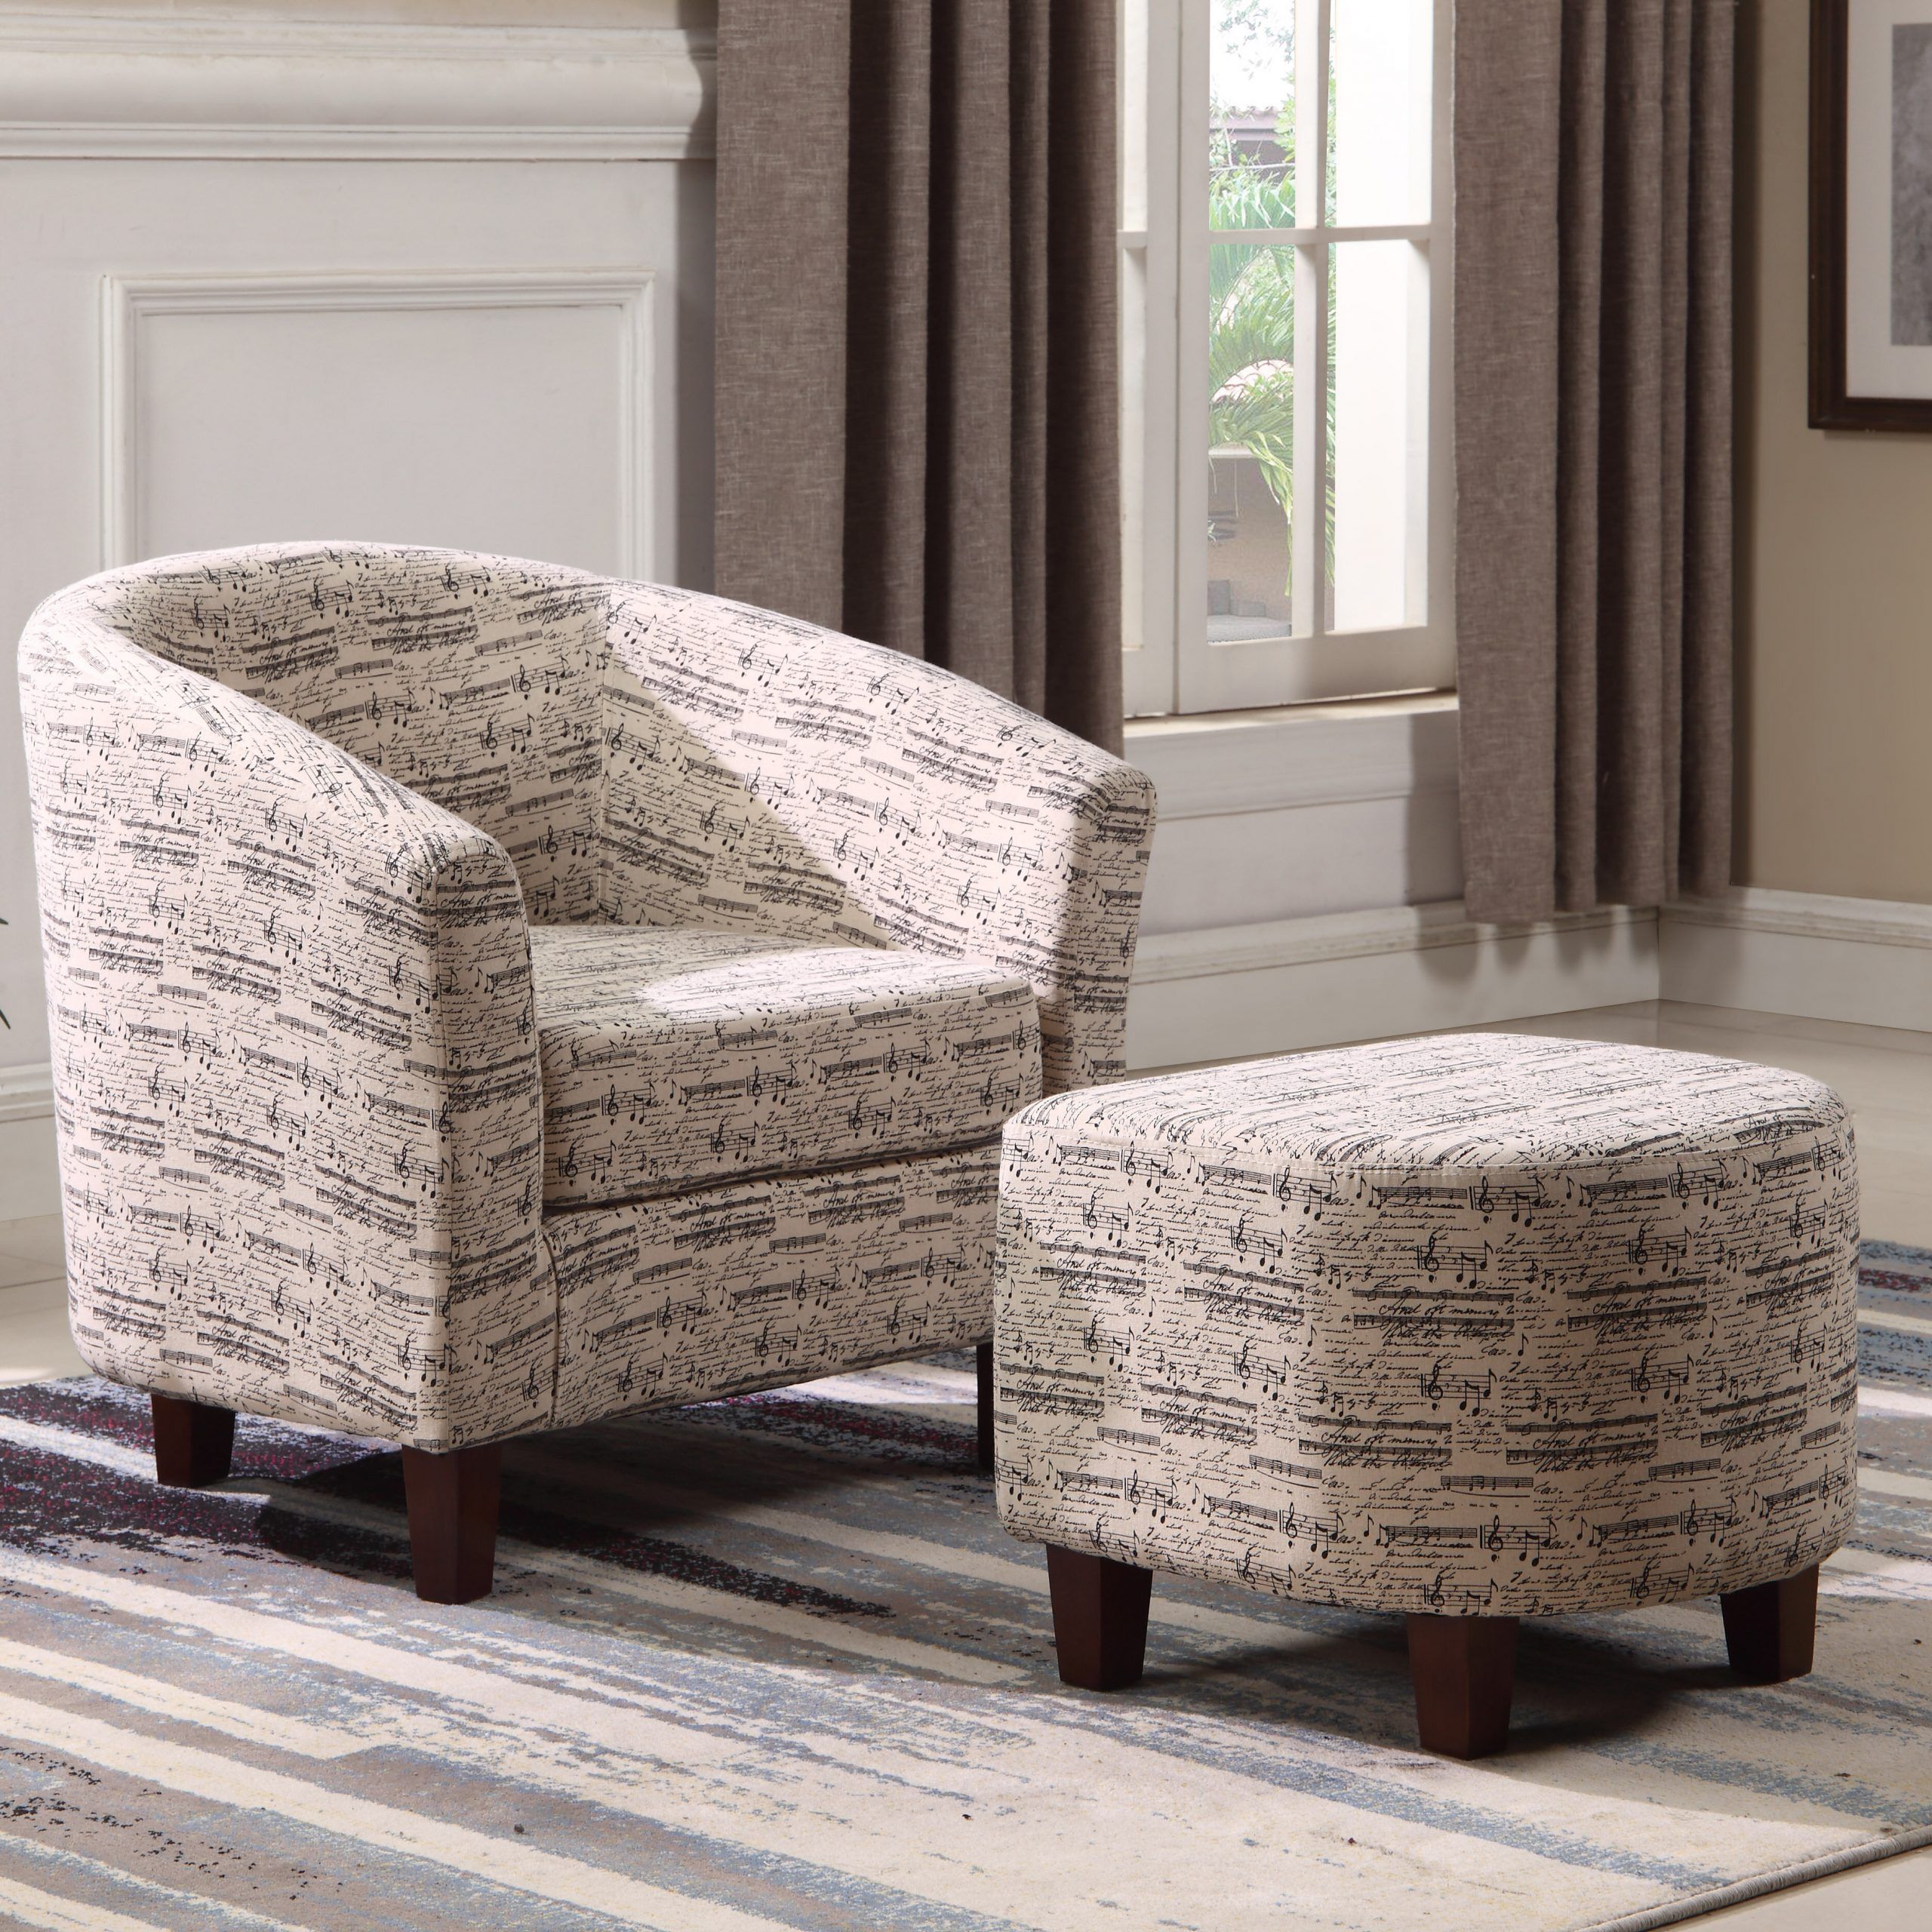 Ottoman Included Small Accent Chairs You'Ll Love In 2021 Pertaining To Harmon Cloud Barrel Chairs And Ottoman (View 9 of 15)